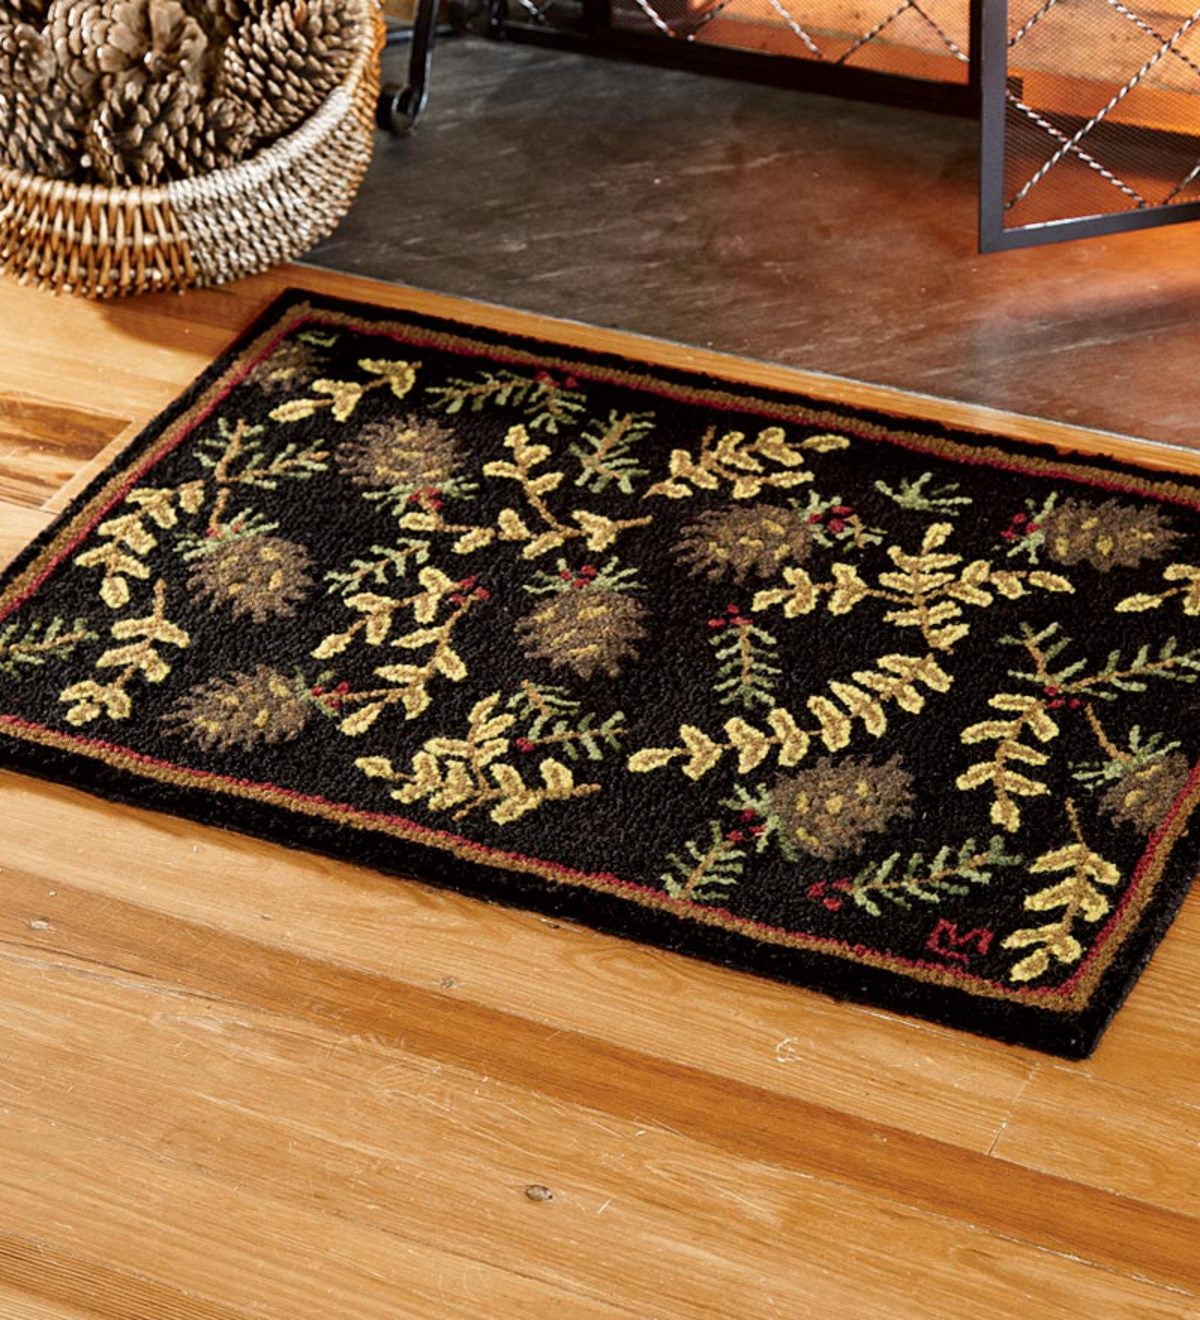 2' x 3' Hand-Hooked Fire-Resistant Willows And Cones Wool Rug